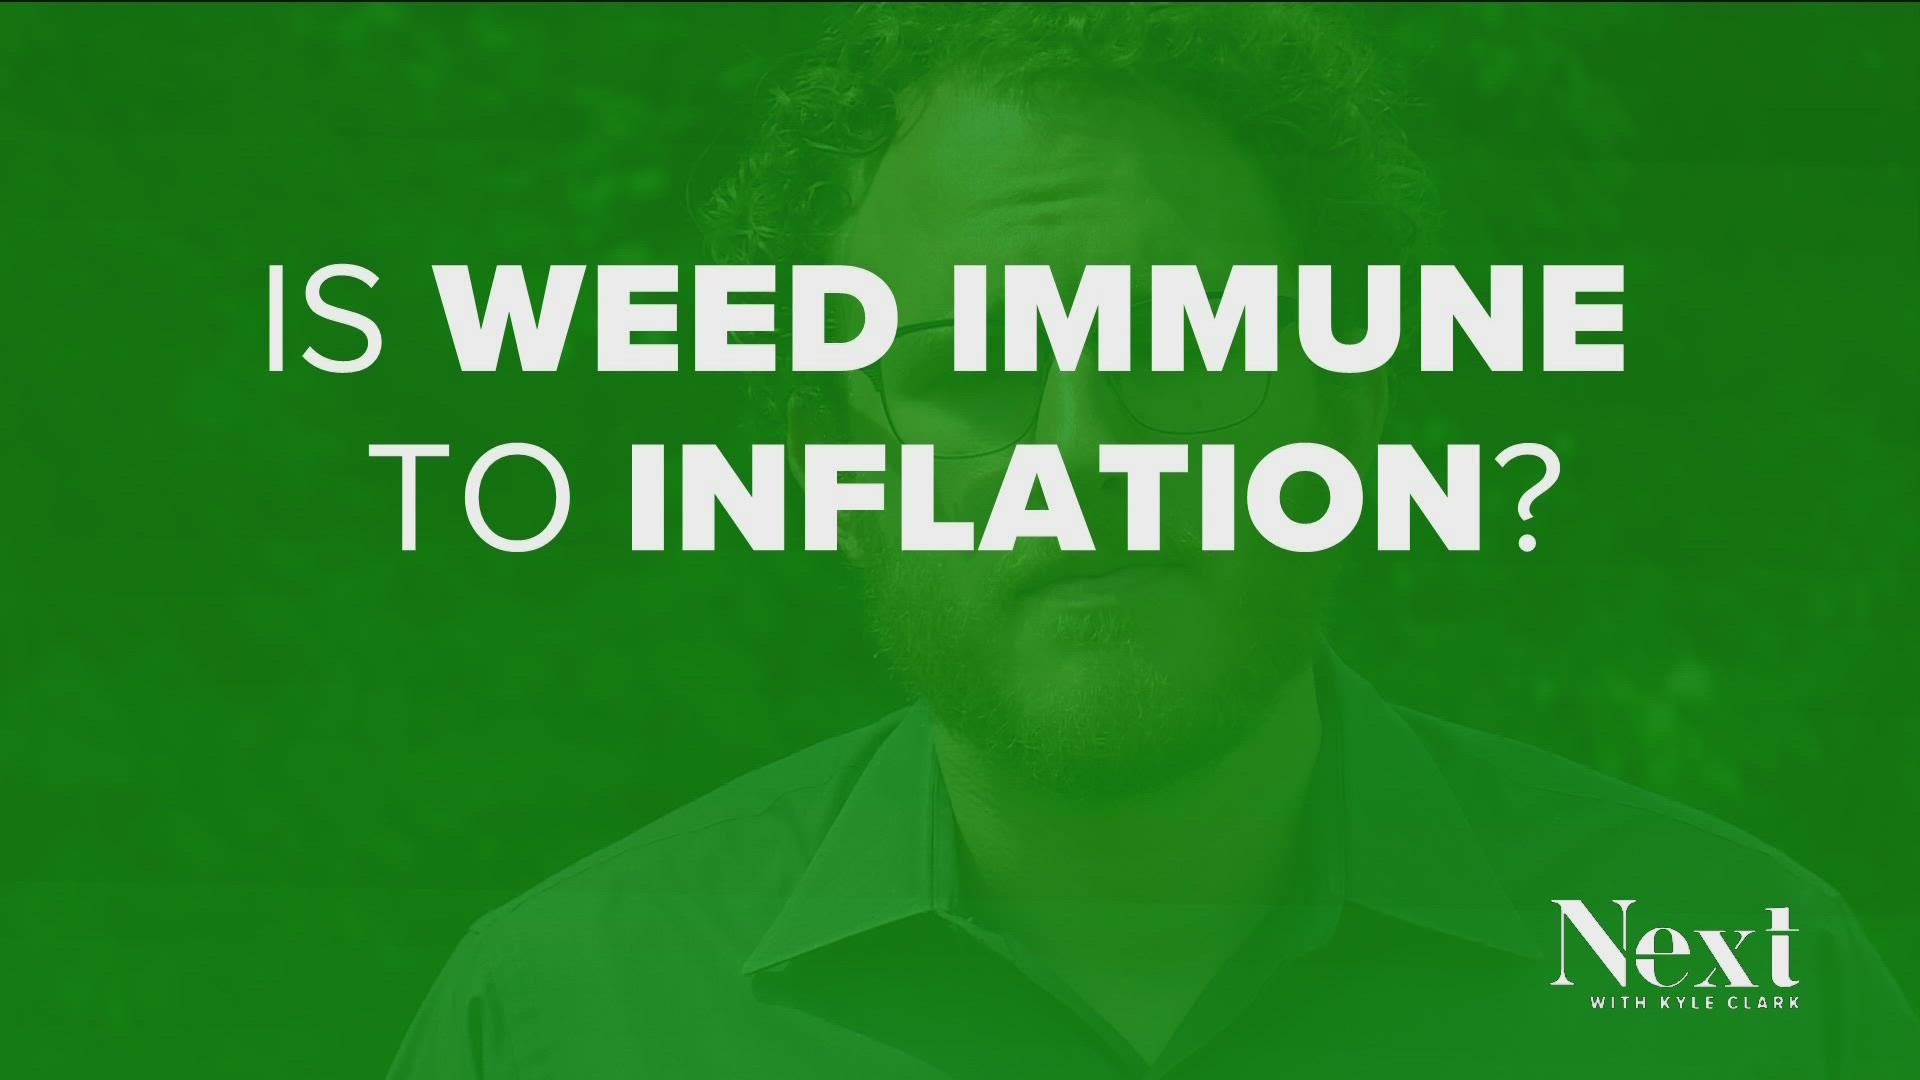 As inflation continues to impact wallets – we found a product that’s getting cheaper while nearly everything else gets more expensive – marijuana.